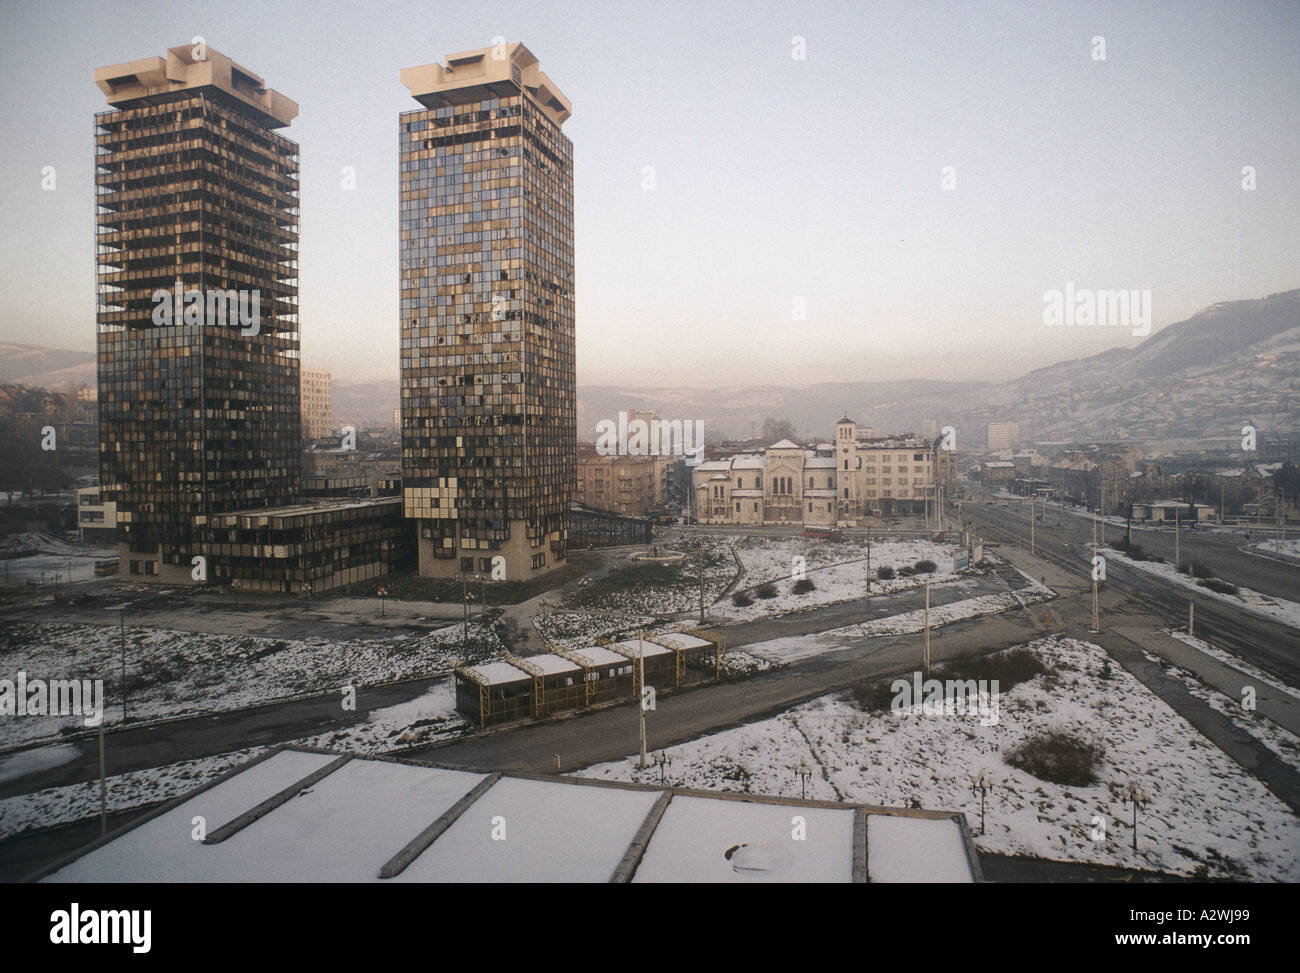 Landscape showing the ruined Unis Towers from the holiday inn 300 yards 91m from the front line sarajevo 1994 Stock Photo